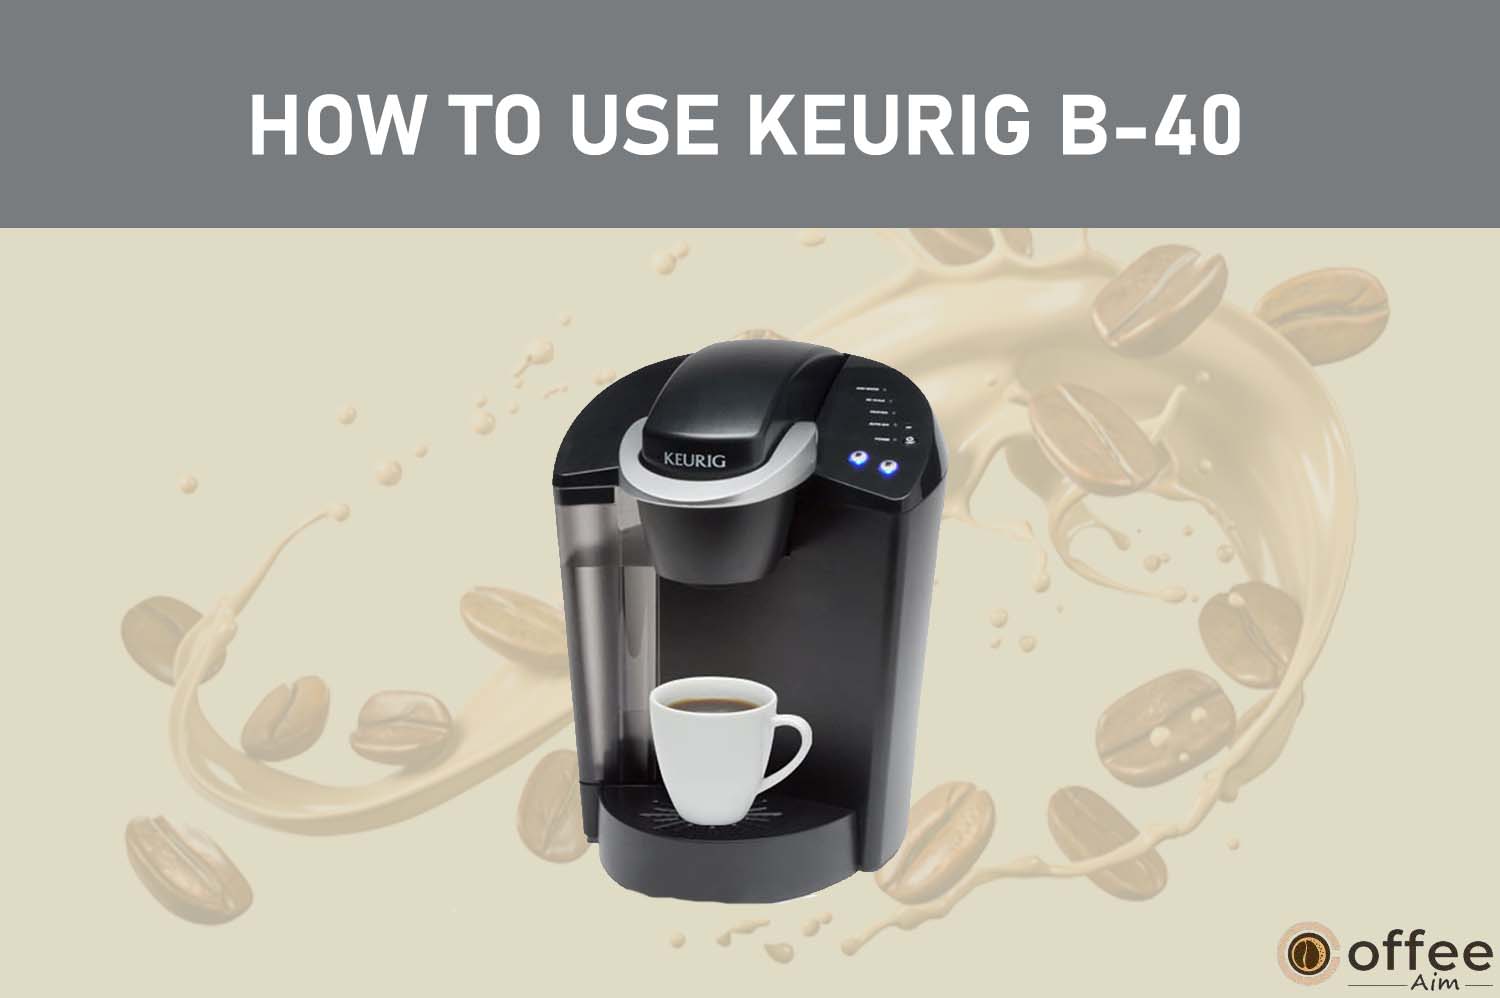 feature image for the article "How To Use Keurig B-40"